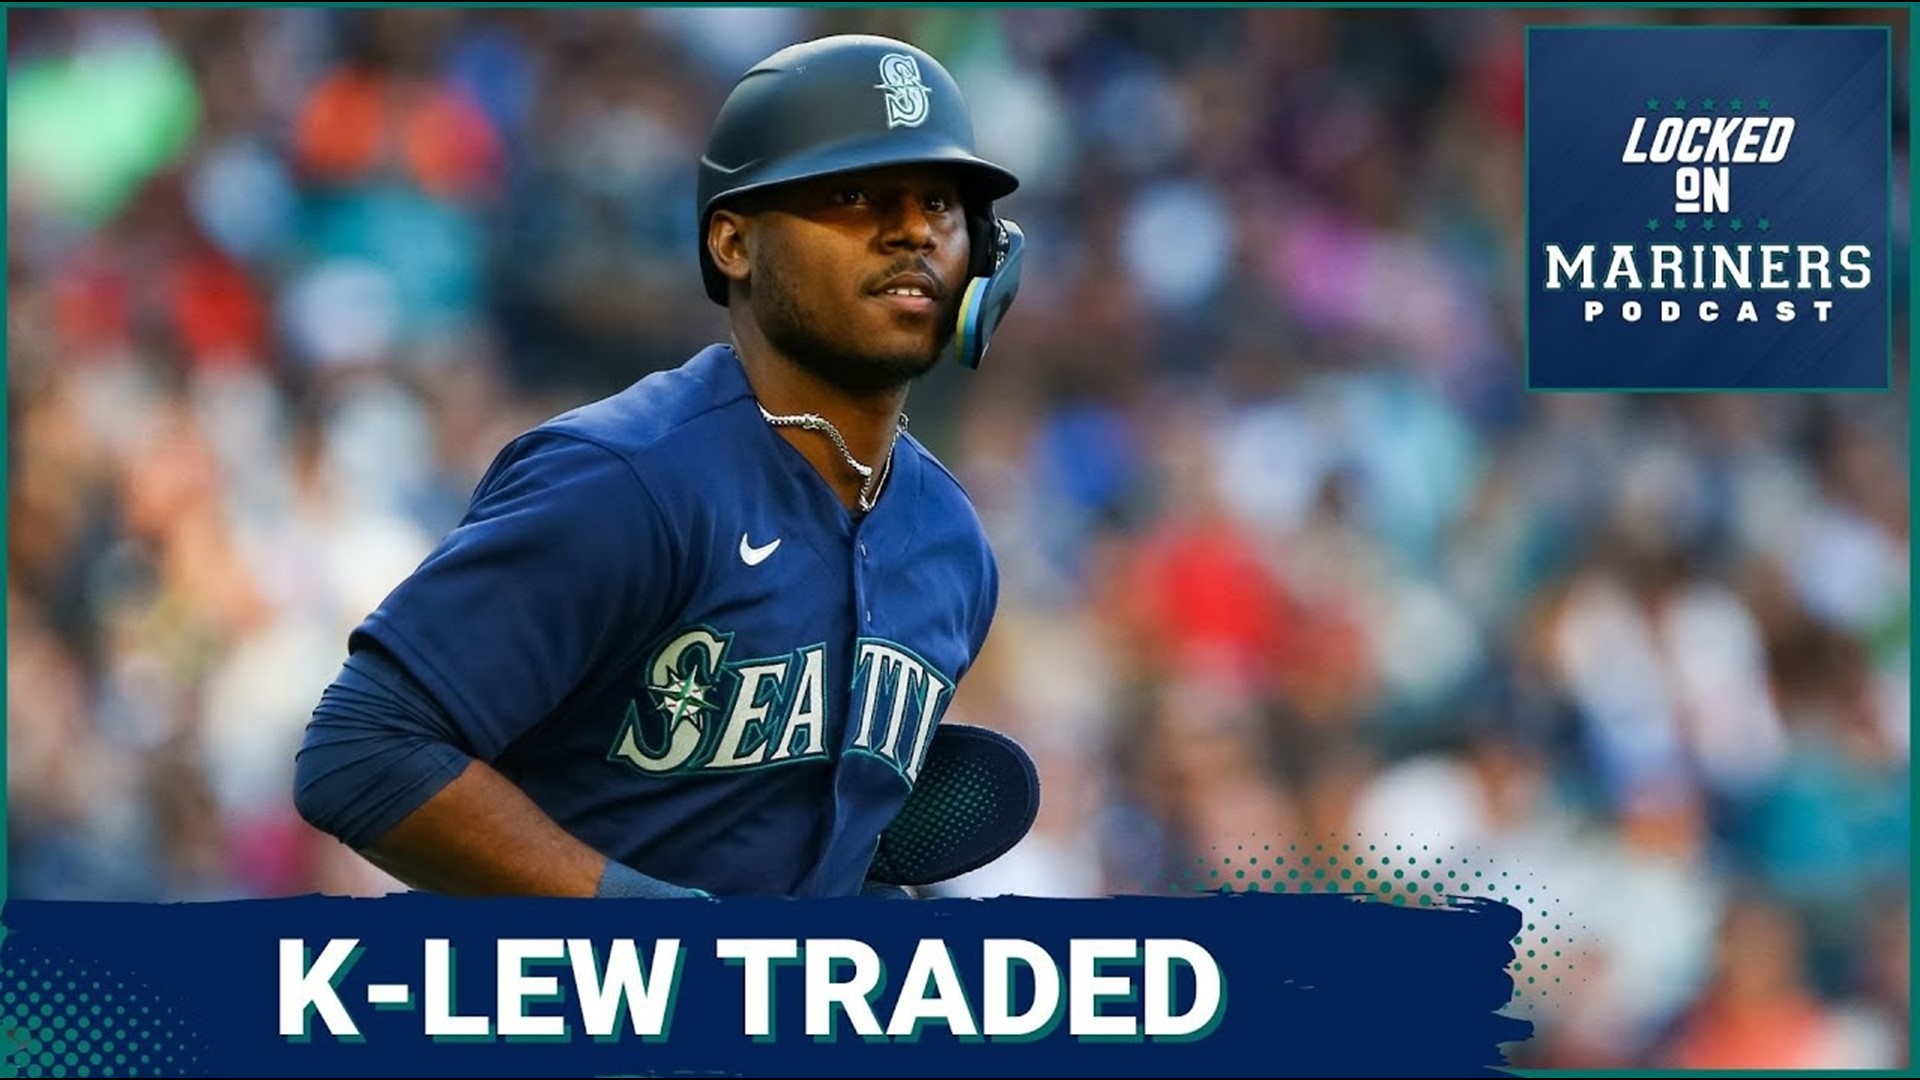 The Seattle Mariners have traded 2020 AL Rookie of the Year Kyle Lewis to the Arizona Diamondbacks in exchange for catcher/outfielder Cooper Hummel.